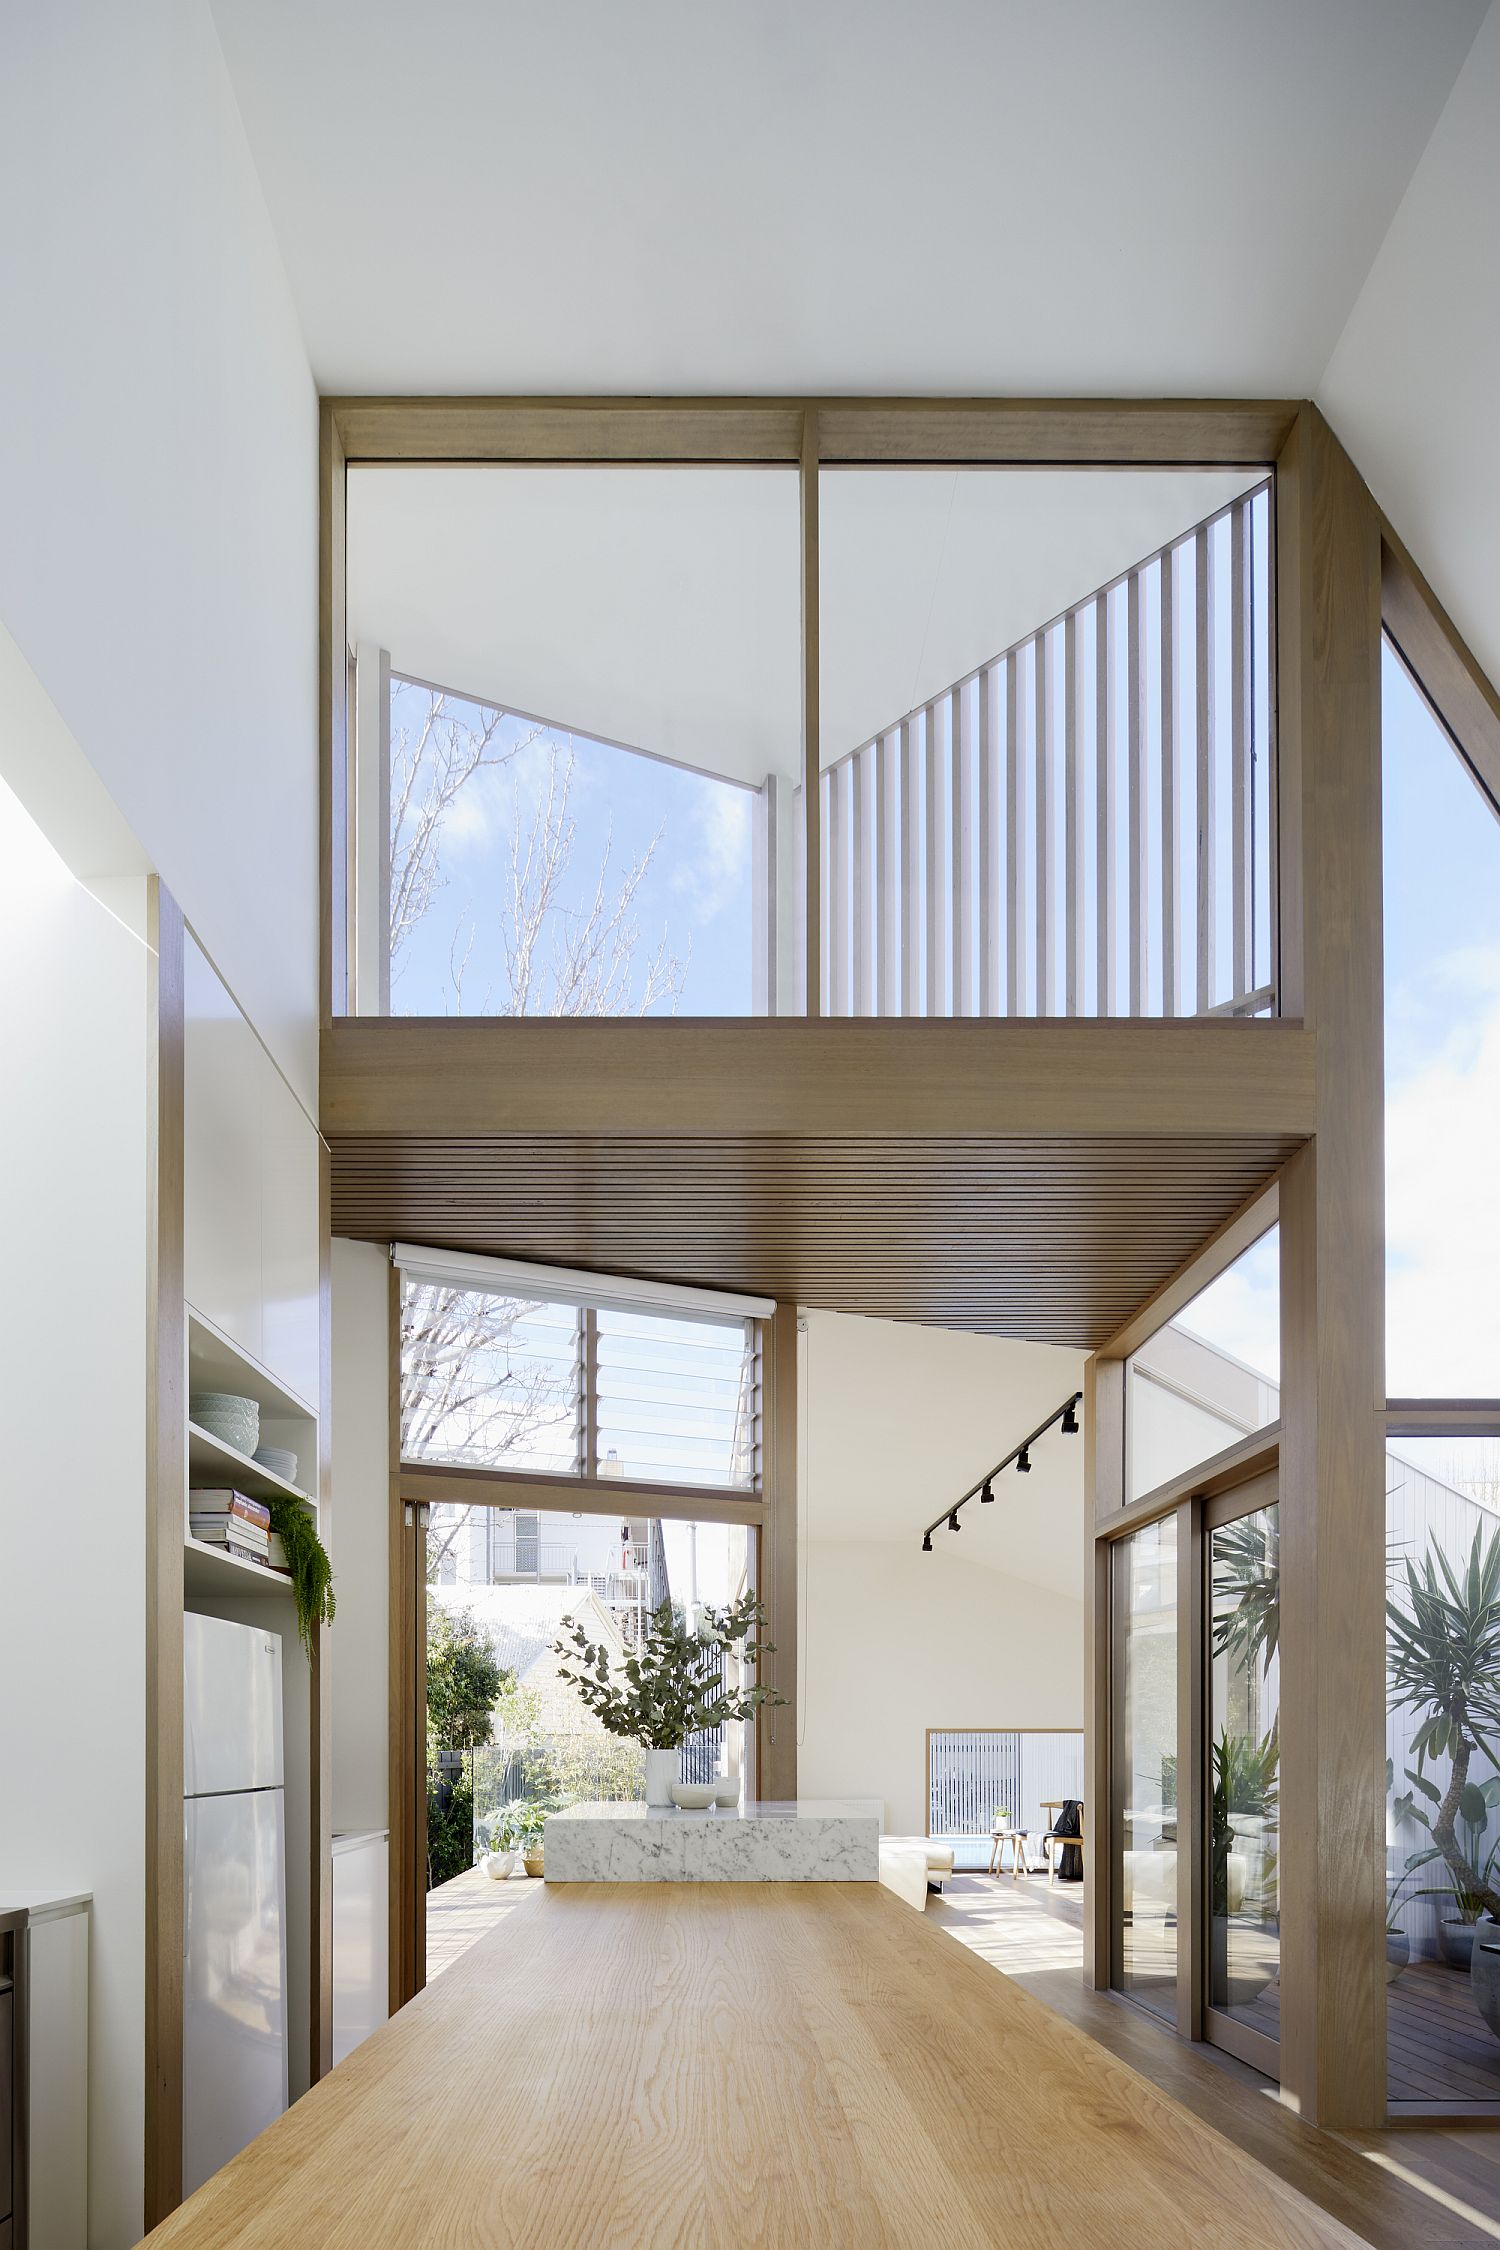 Windows-and-doors-in-glass-bring-in-ample-natural-light